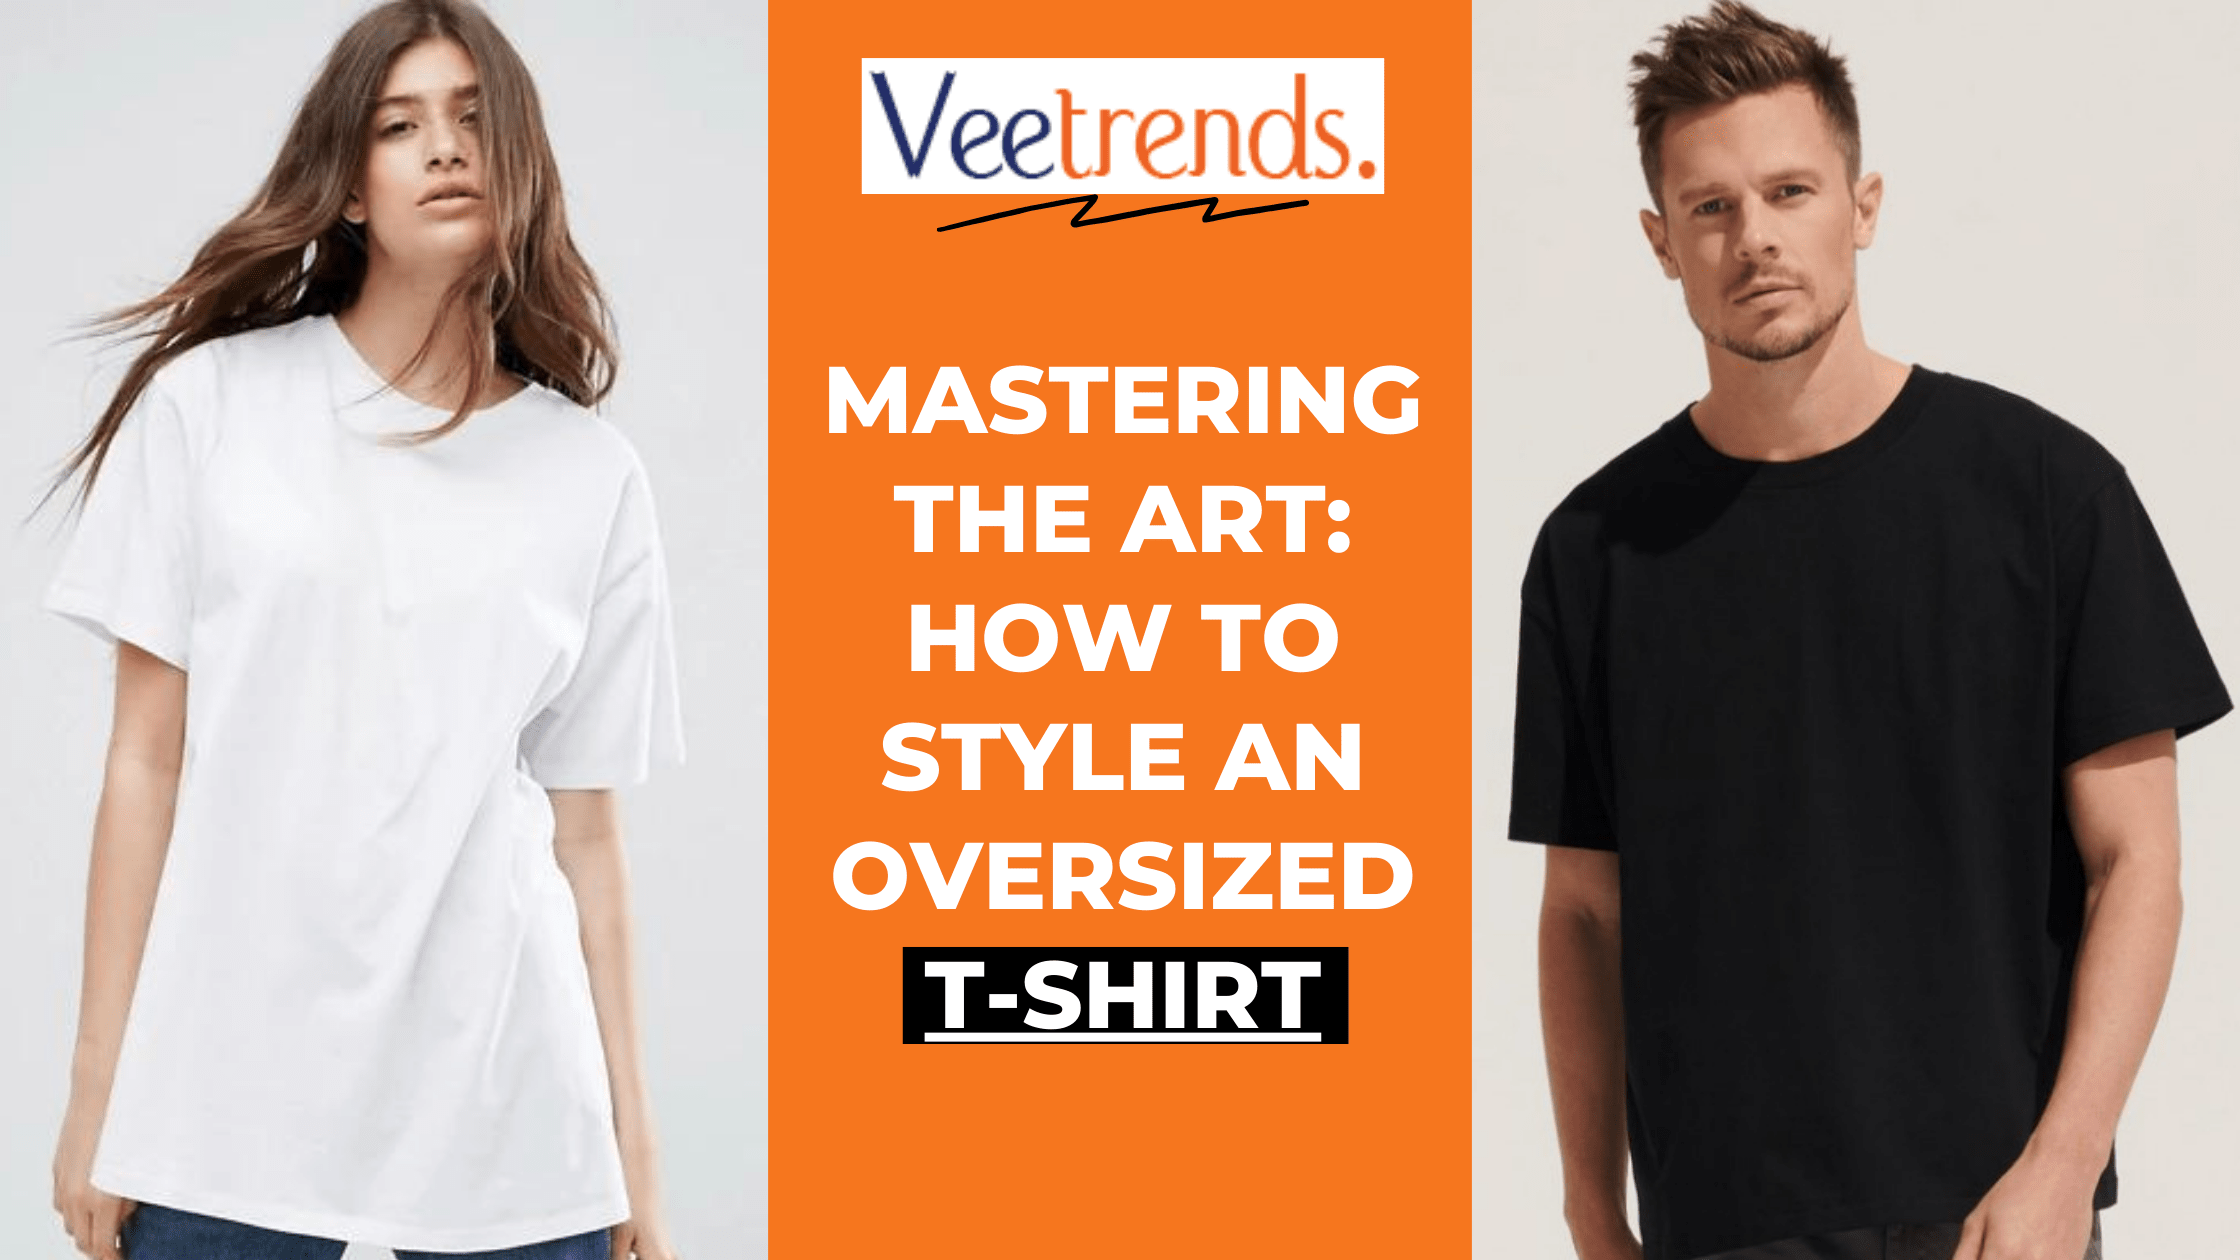 Mastering The Art: How To Style An Oversized T-Shirt